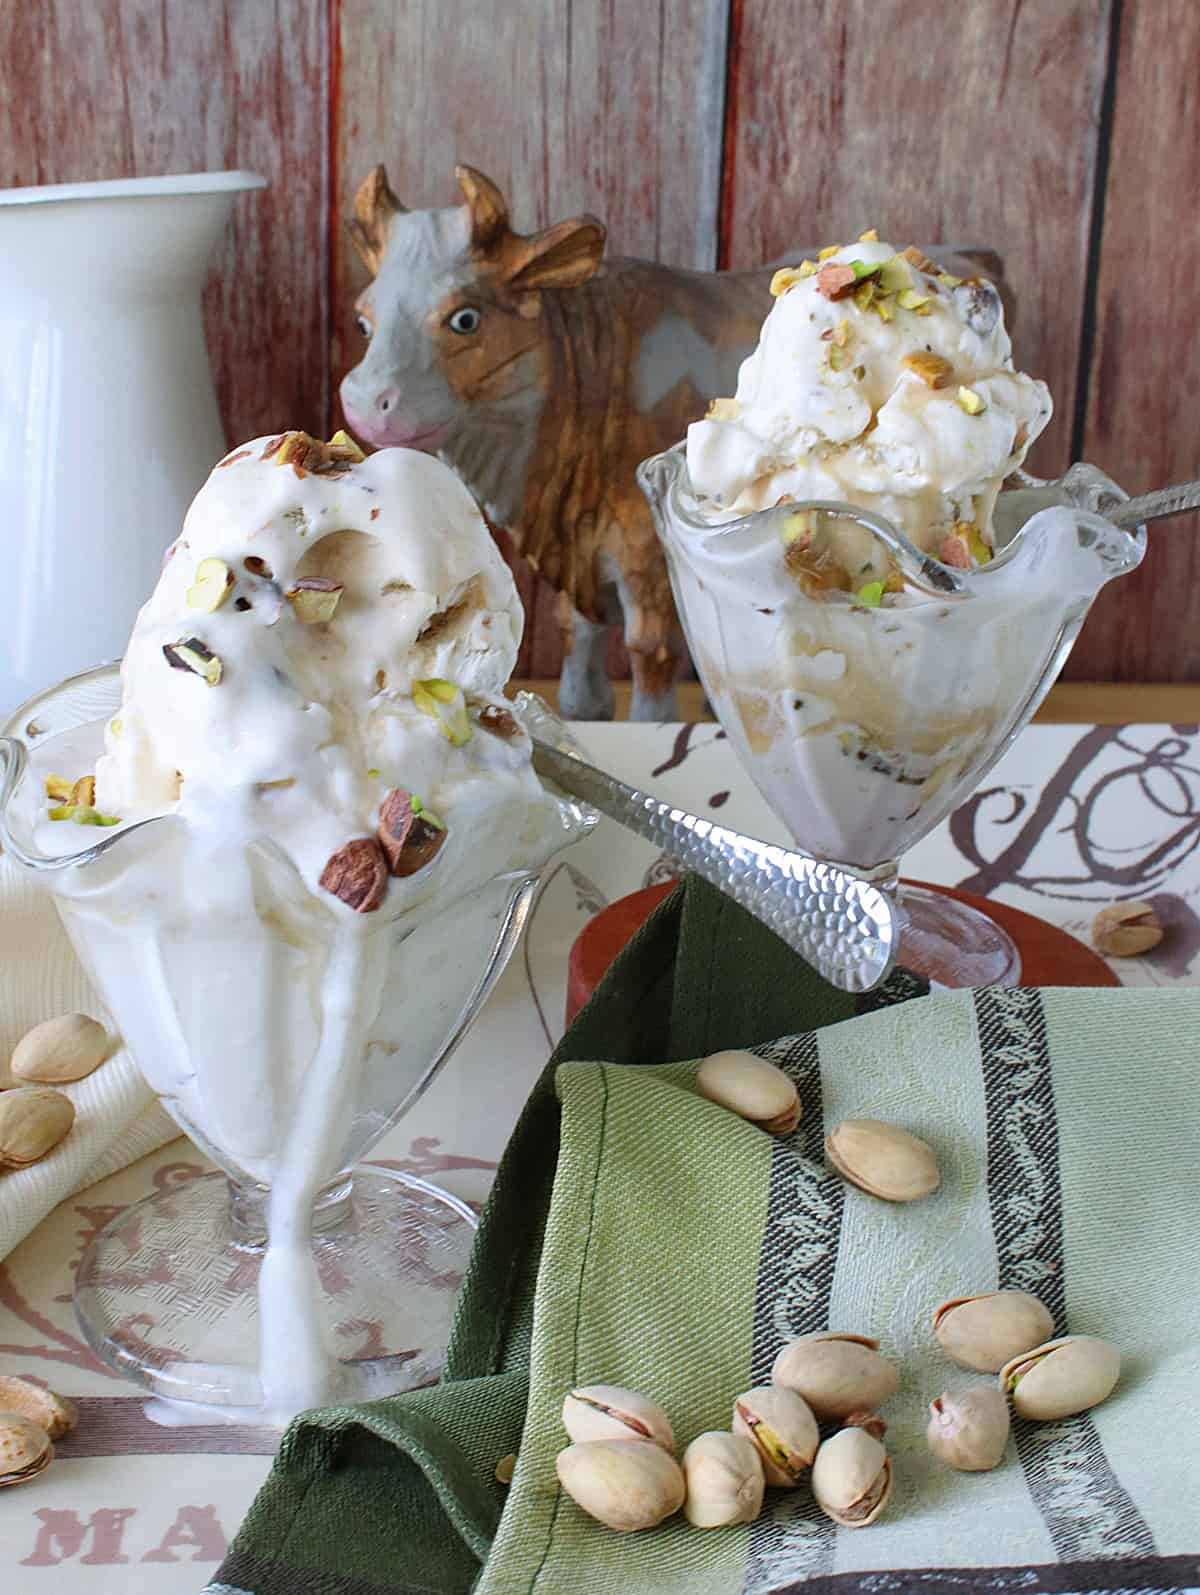 Two glass parfait dishes filled with Maple Pistachio Ice Cream and spoons.